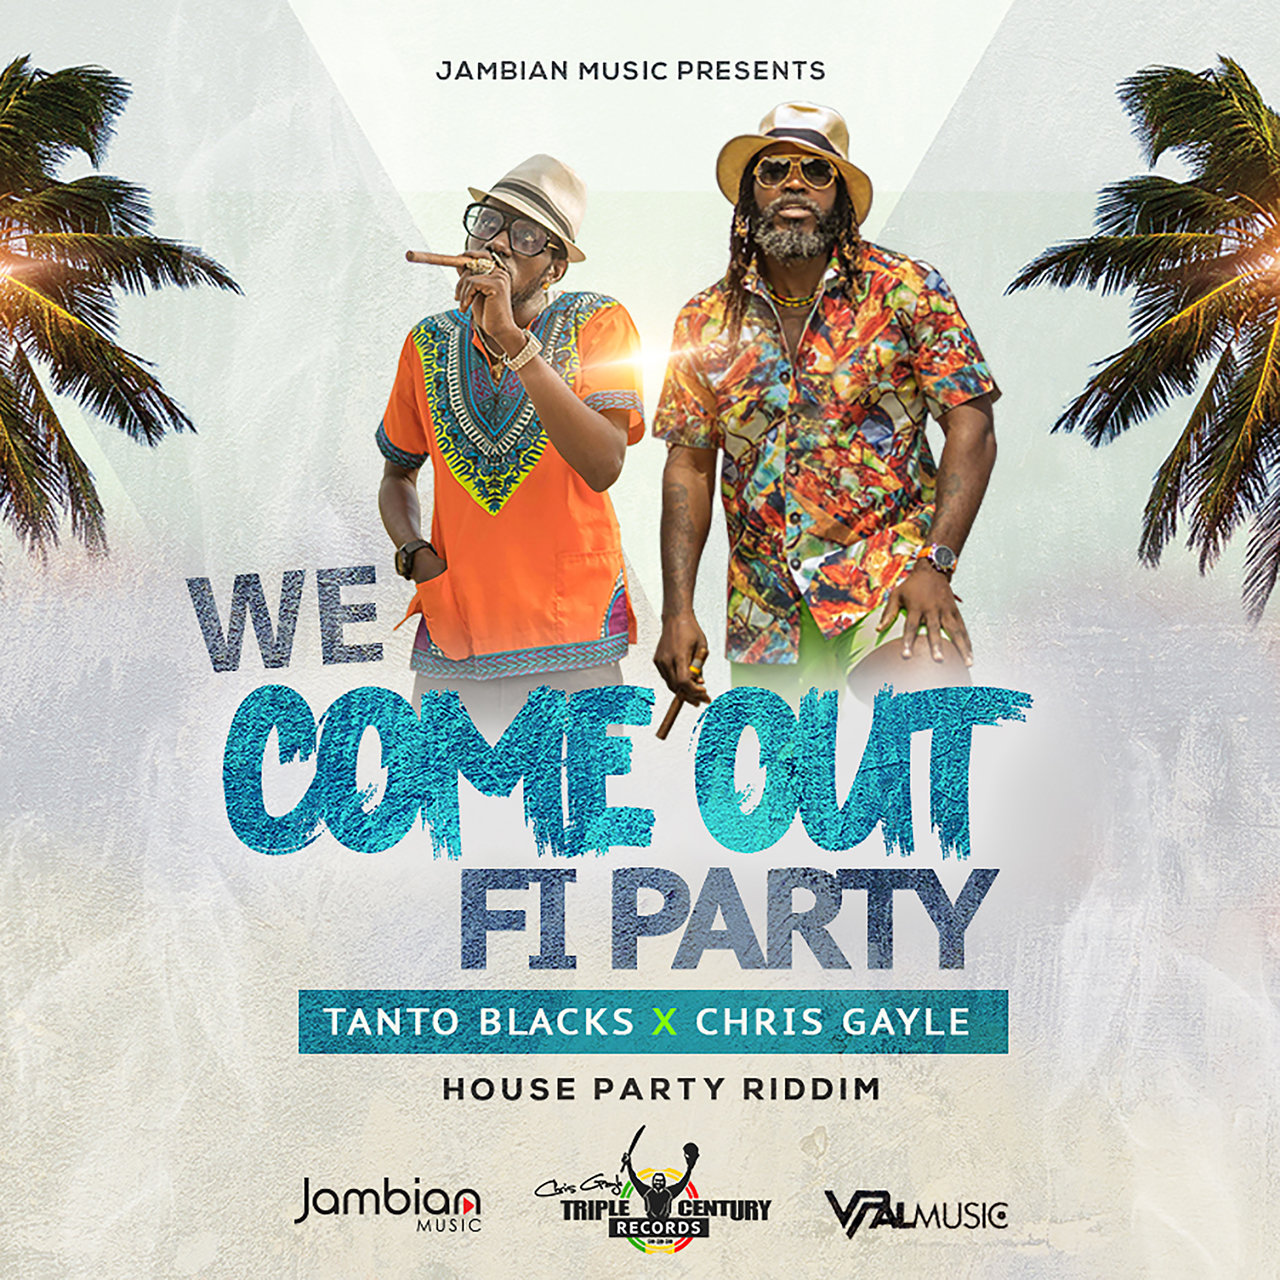 Tanto Blacks and Chris Gayle - We Come Out Fi Party (Cover)